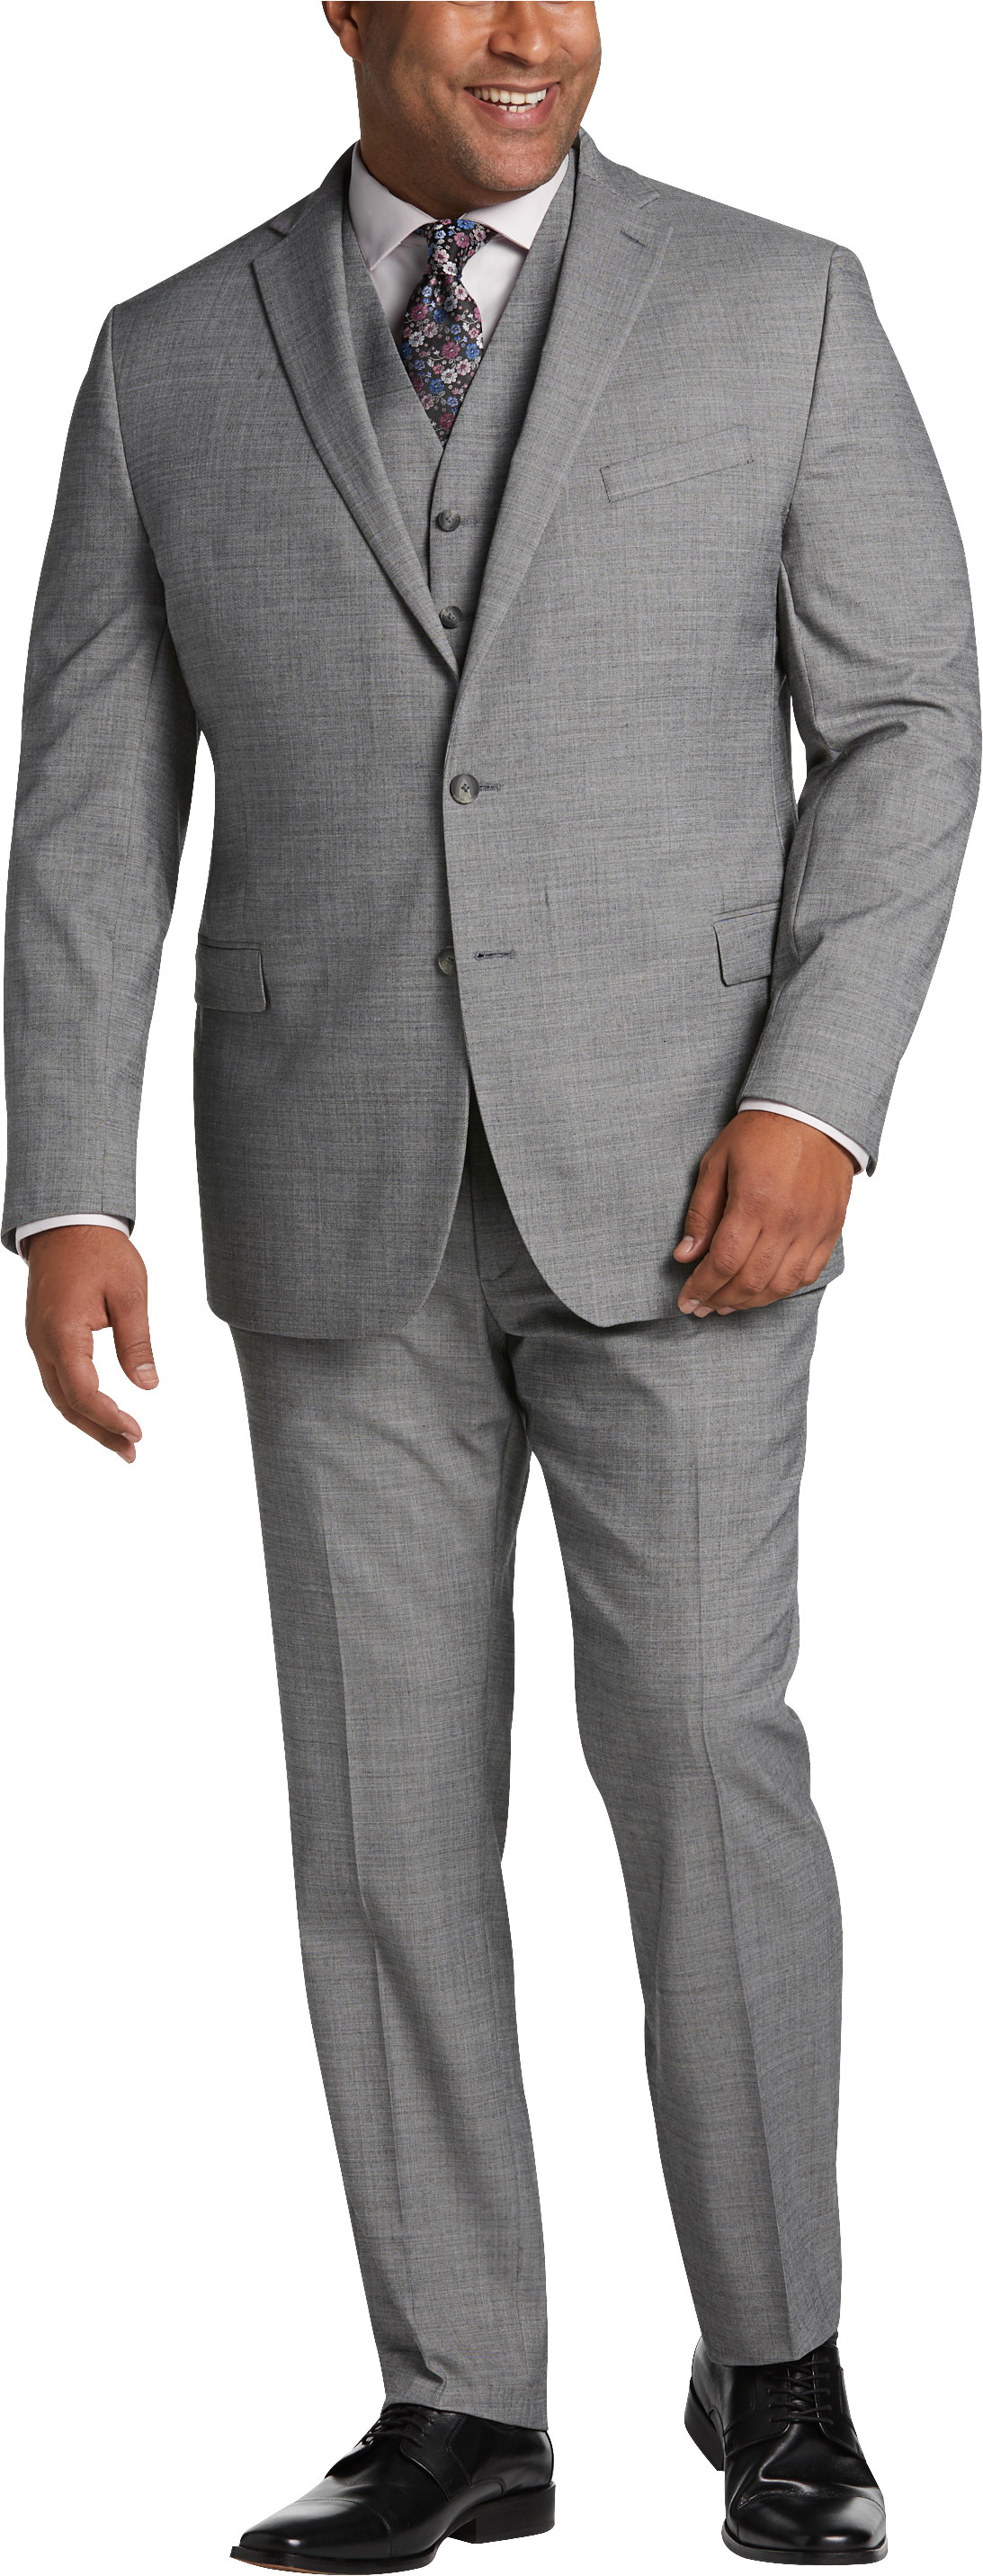 Awearness Kenneth Cole AWEAR-TECH Slim Fit Suit Separates, Black & White Sharkskin